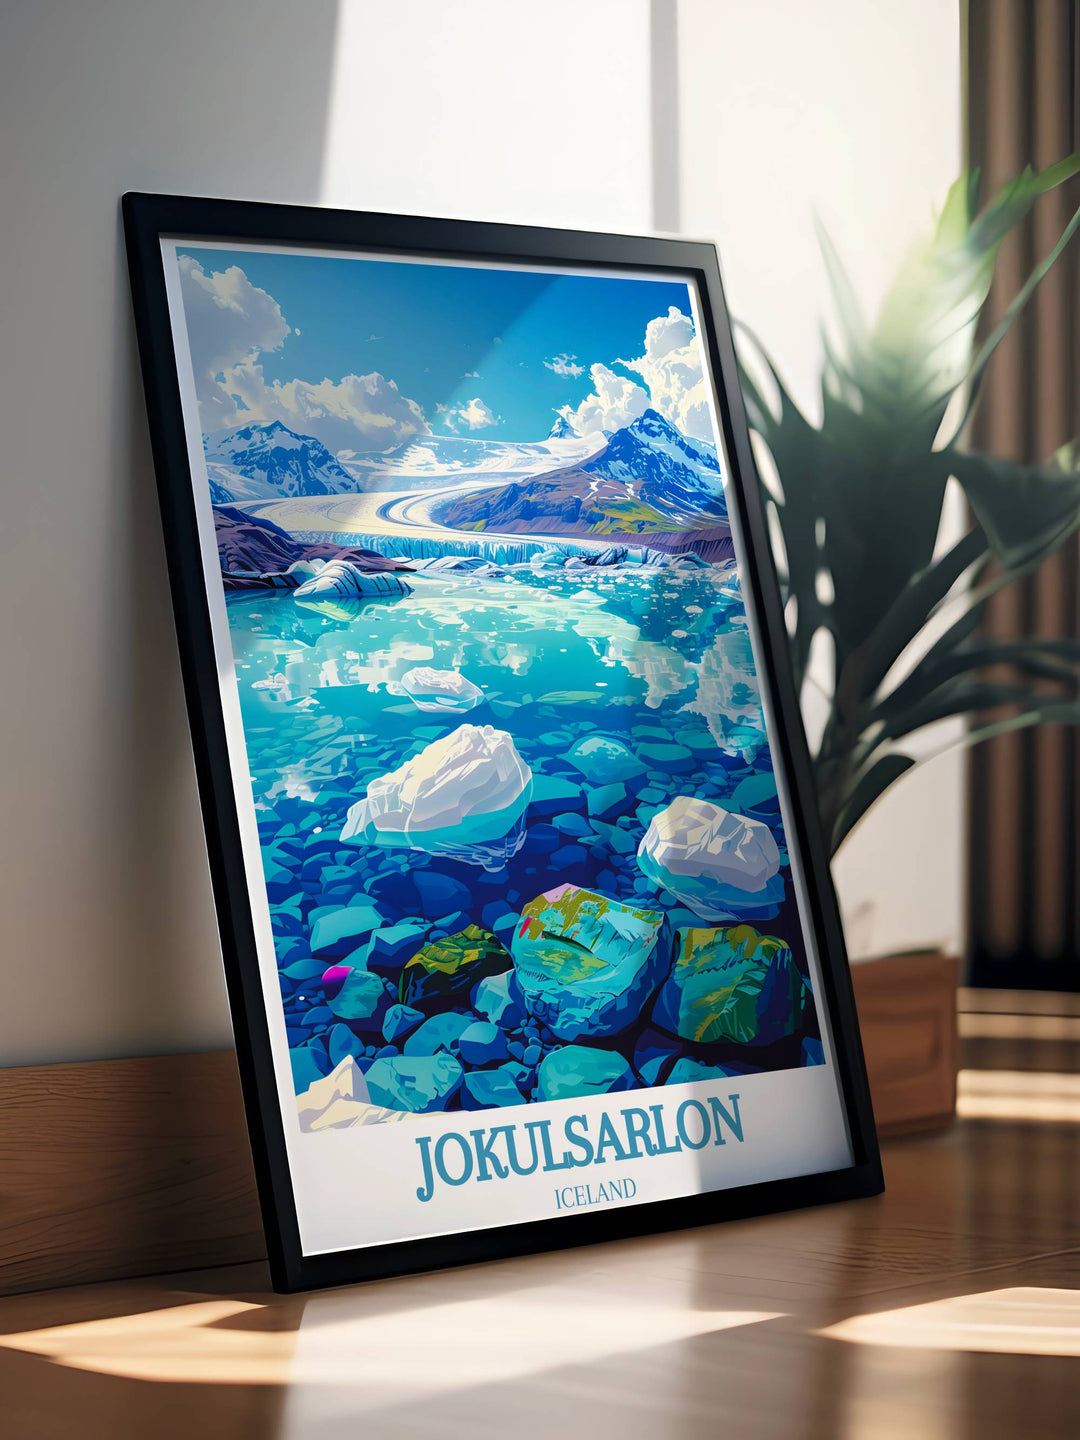 Adorn your walls with the beauty of Jokulsarlon Glacier Lagoon captured in this travel poster, a perfect gift for adventurers